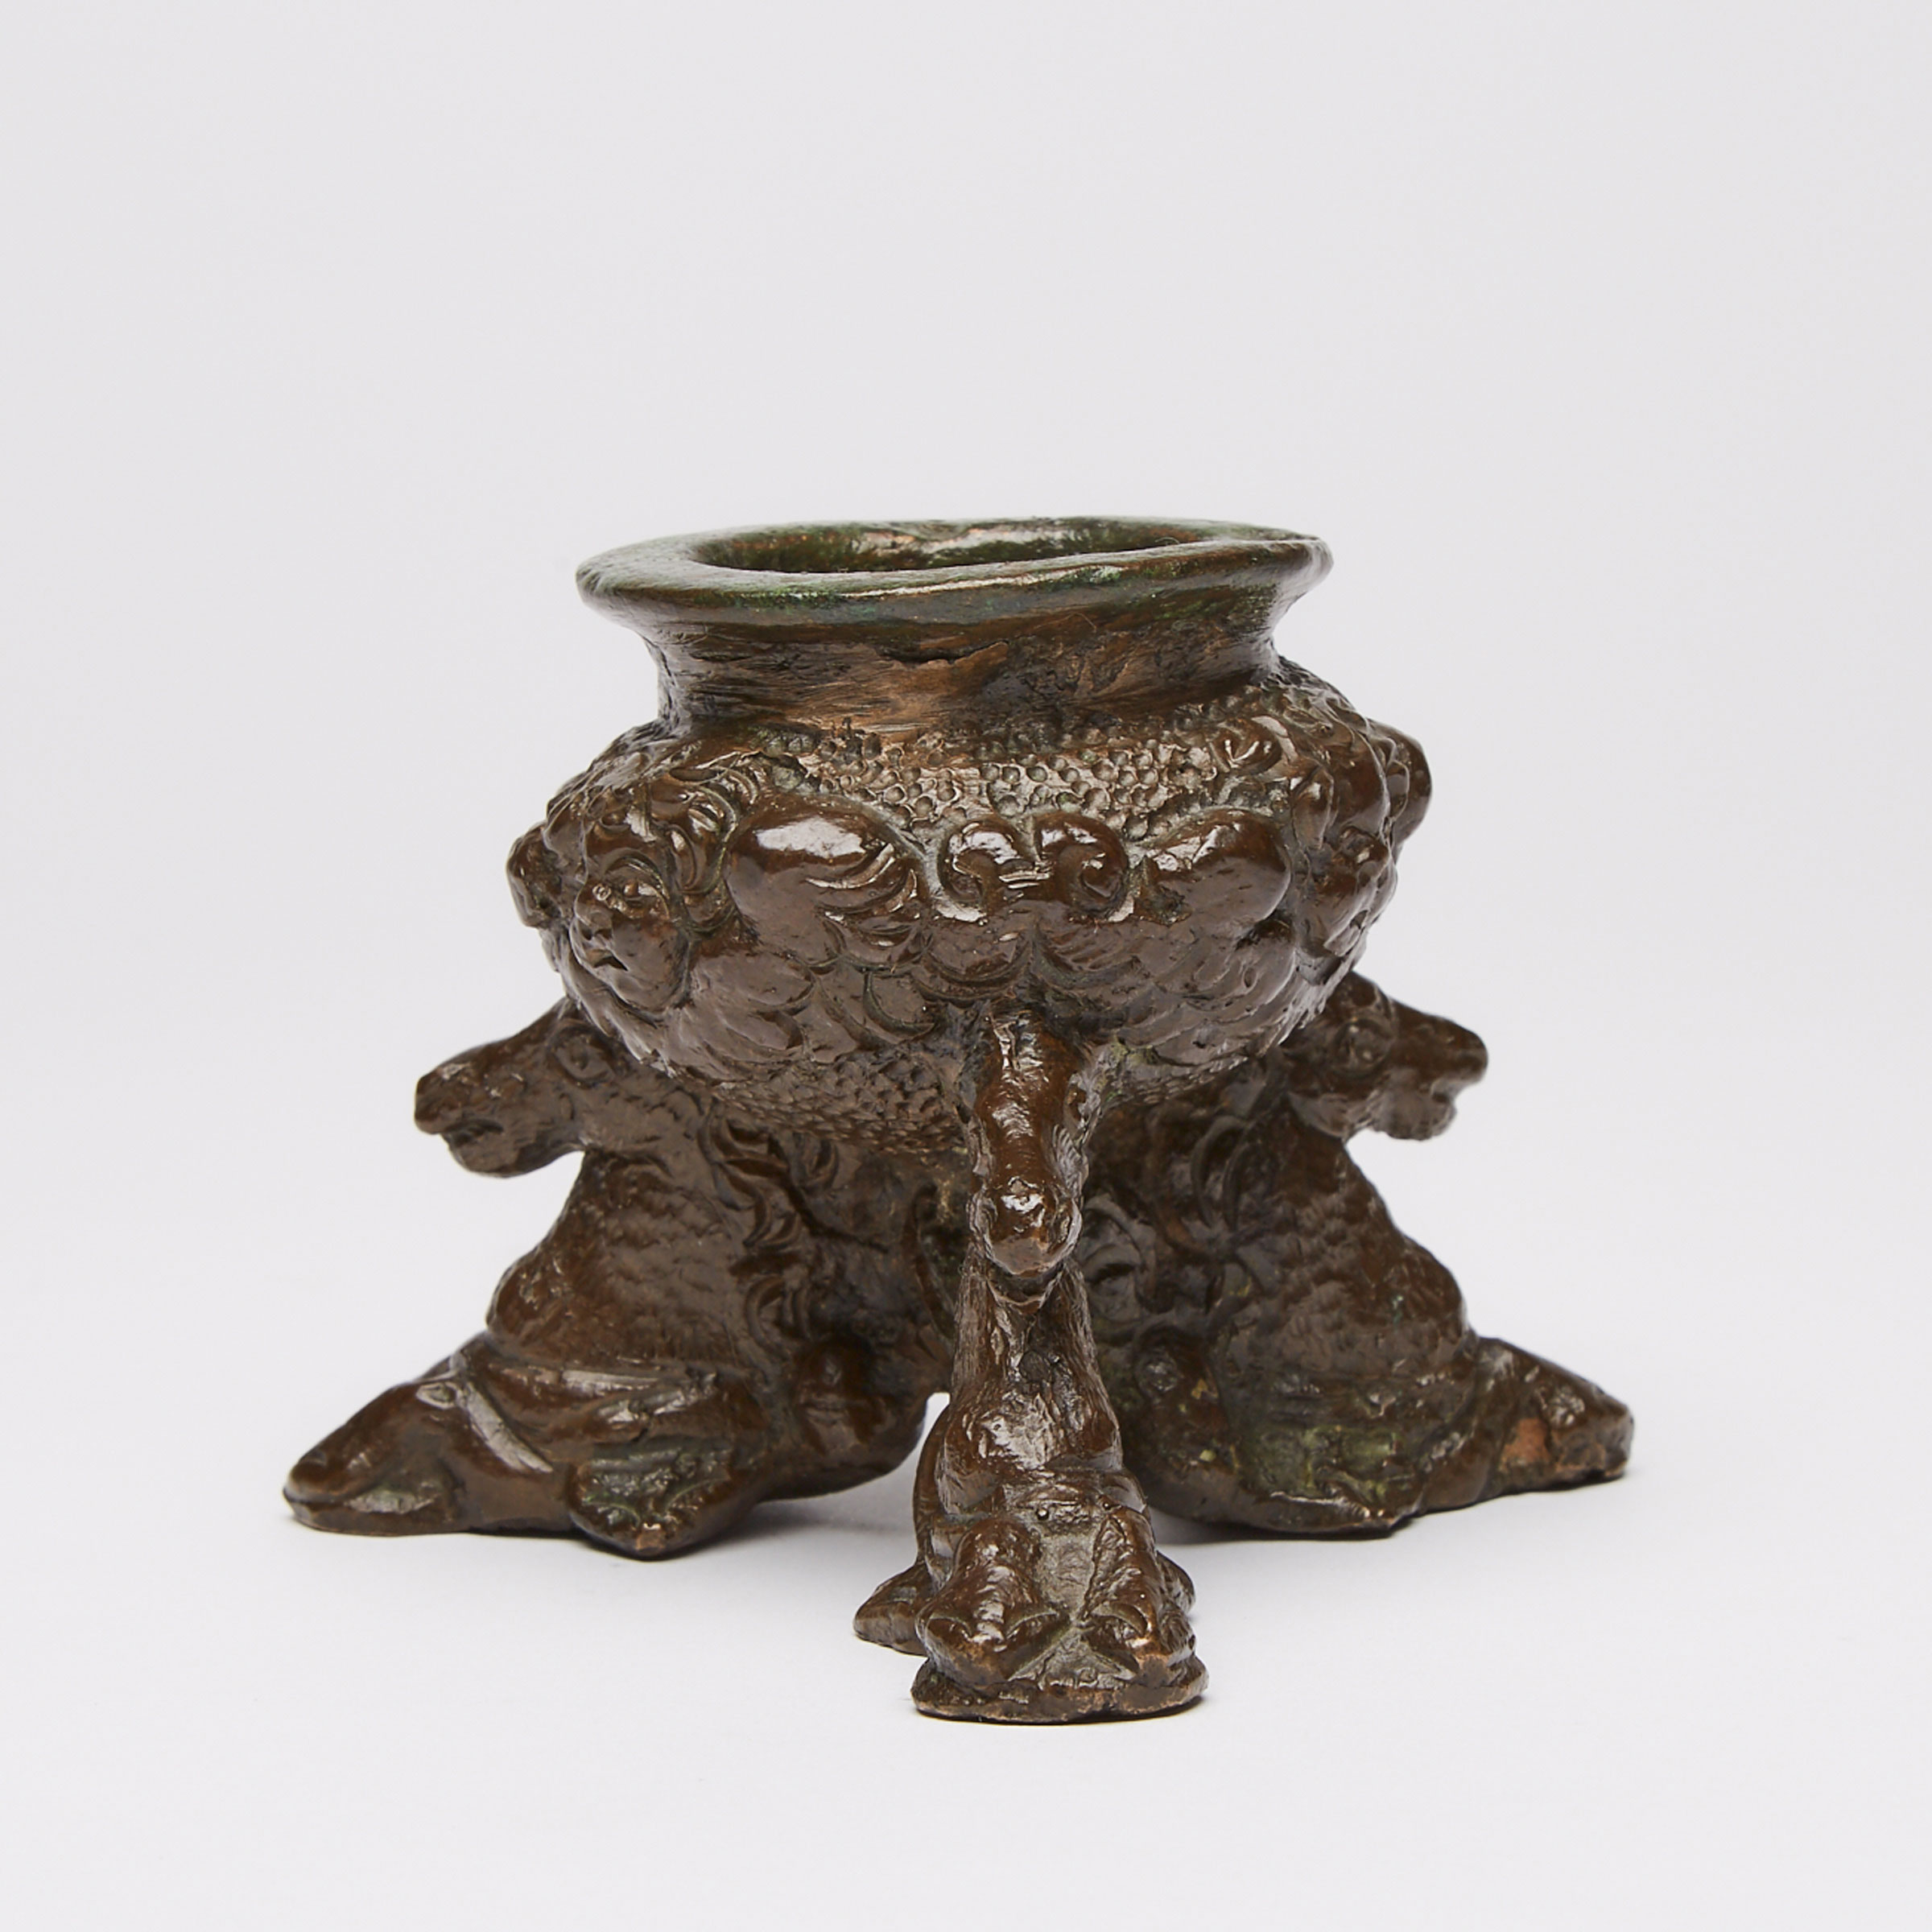 North Italian Bronze Incense Burner, Attributed to the Workshop of Giuseppe de Levis, late 16th century